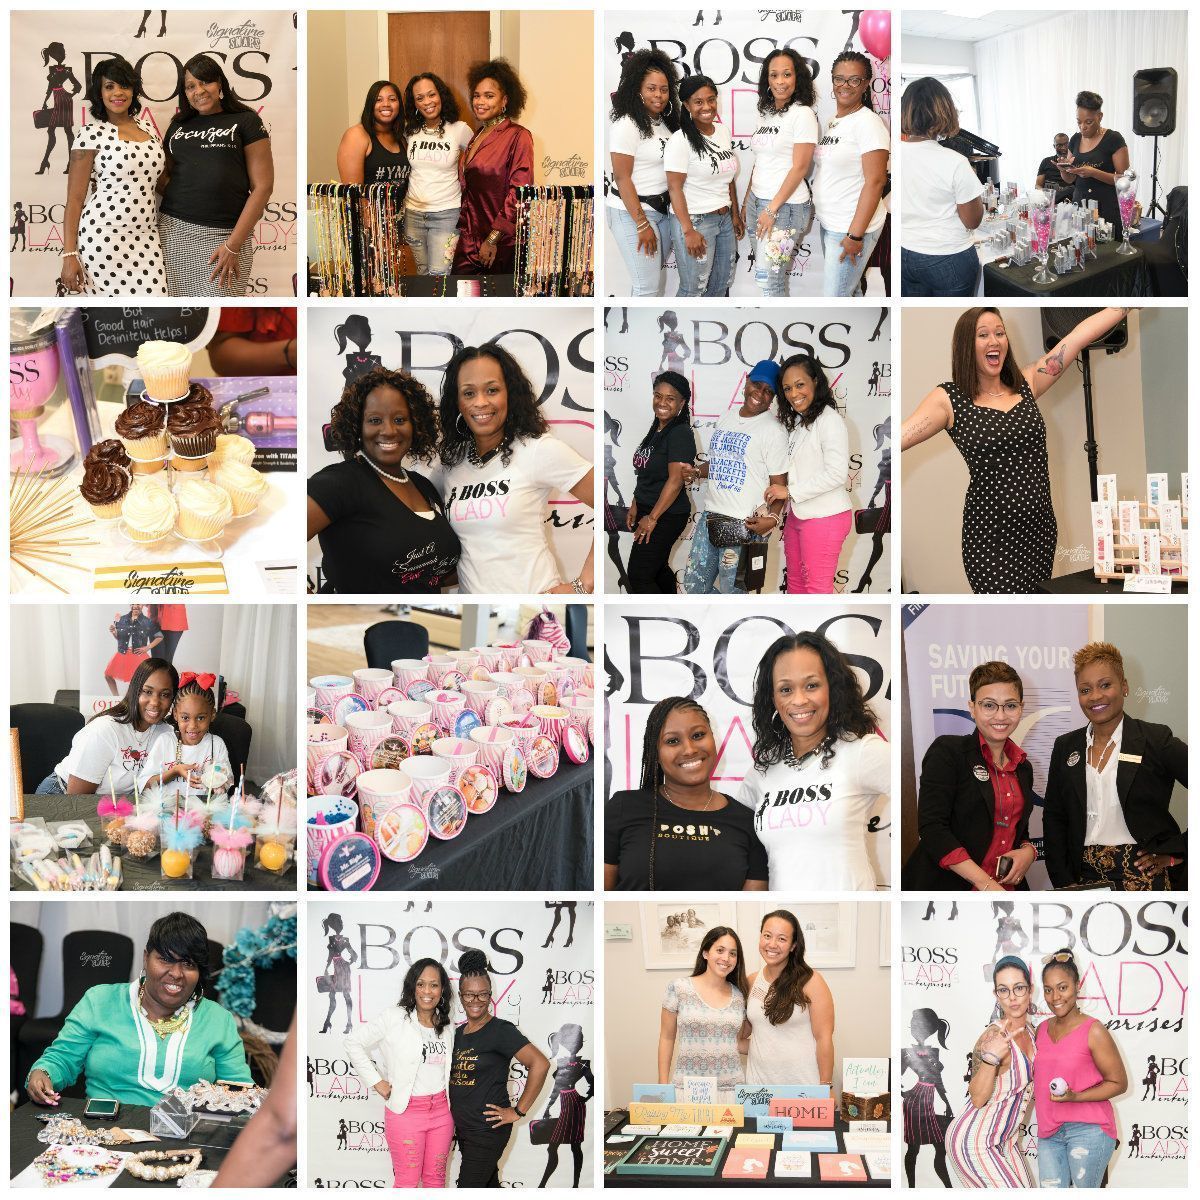 Mother's Day Weekend Pop Up Shop! Don't miss out on shopping for the perfect Mother's Day gift with us! Early Bird Vendor Special! Info: tawana@thebossladyenterprises.com. #FreeAdmission #PopUpShop #Vendors #LiveDJ